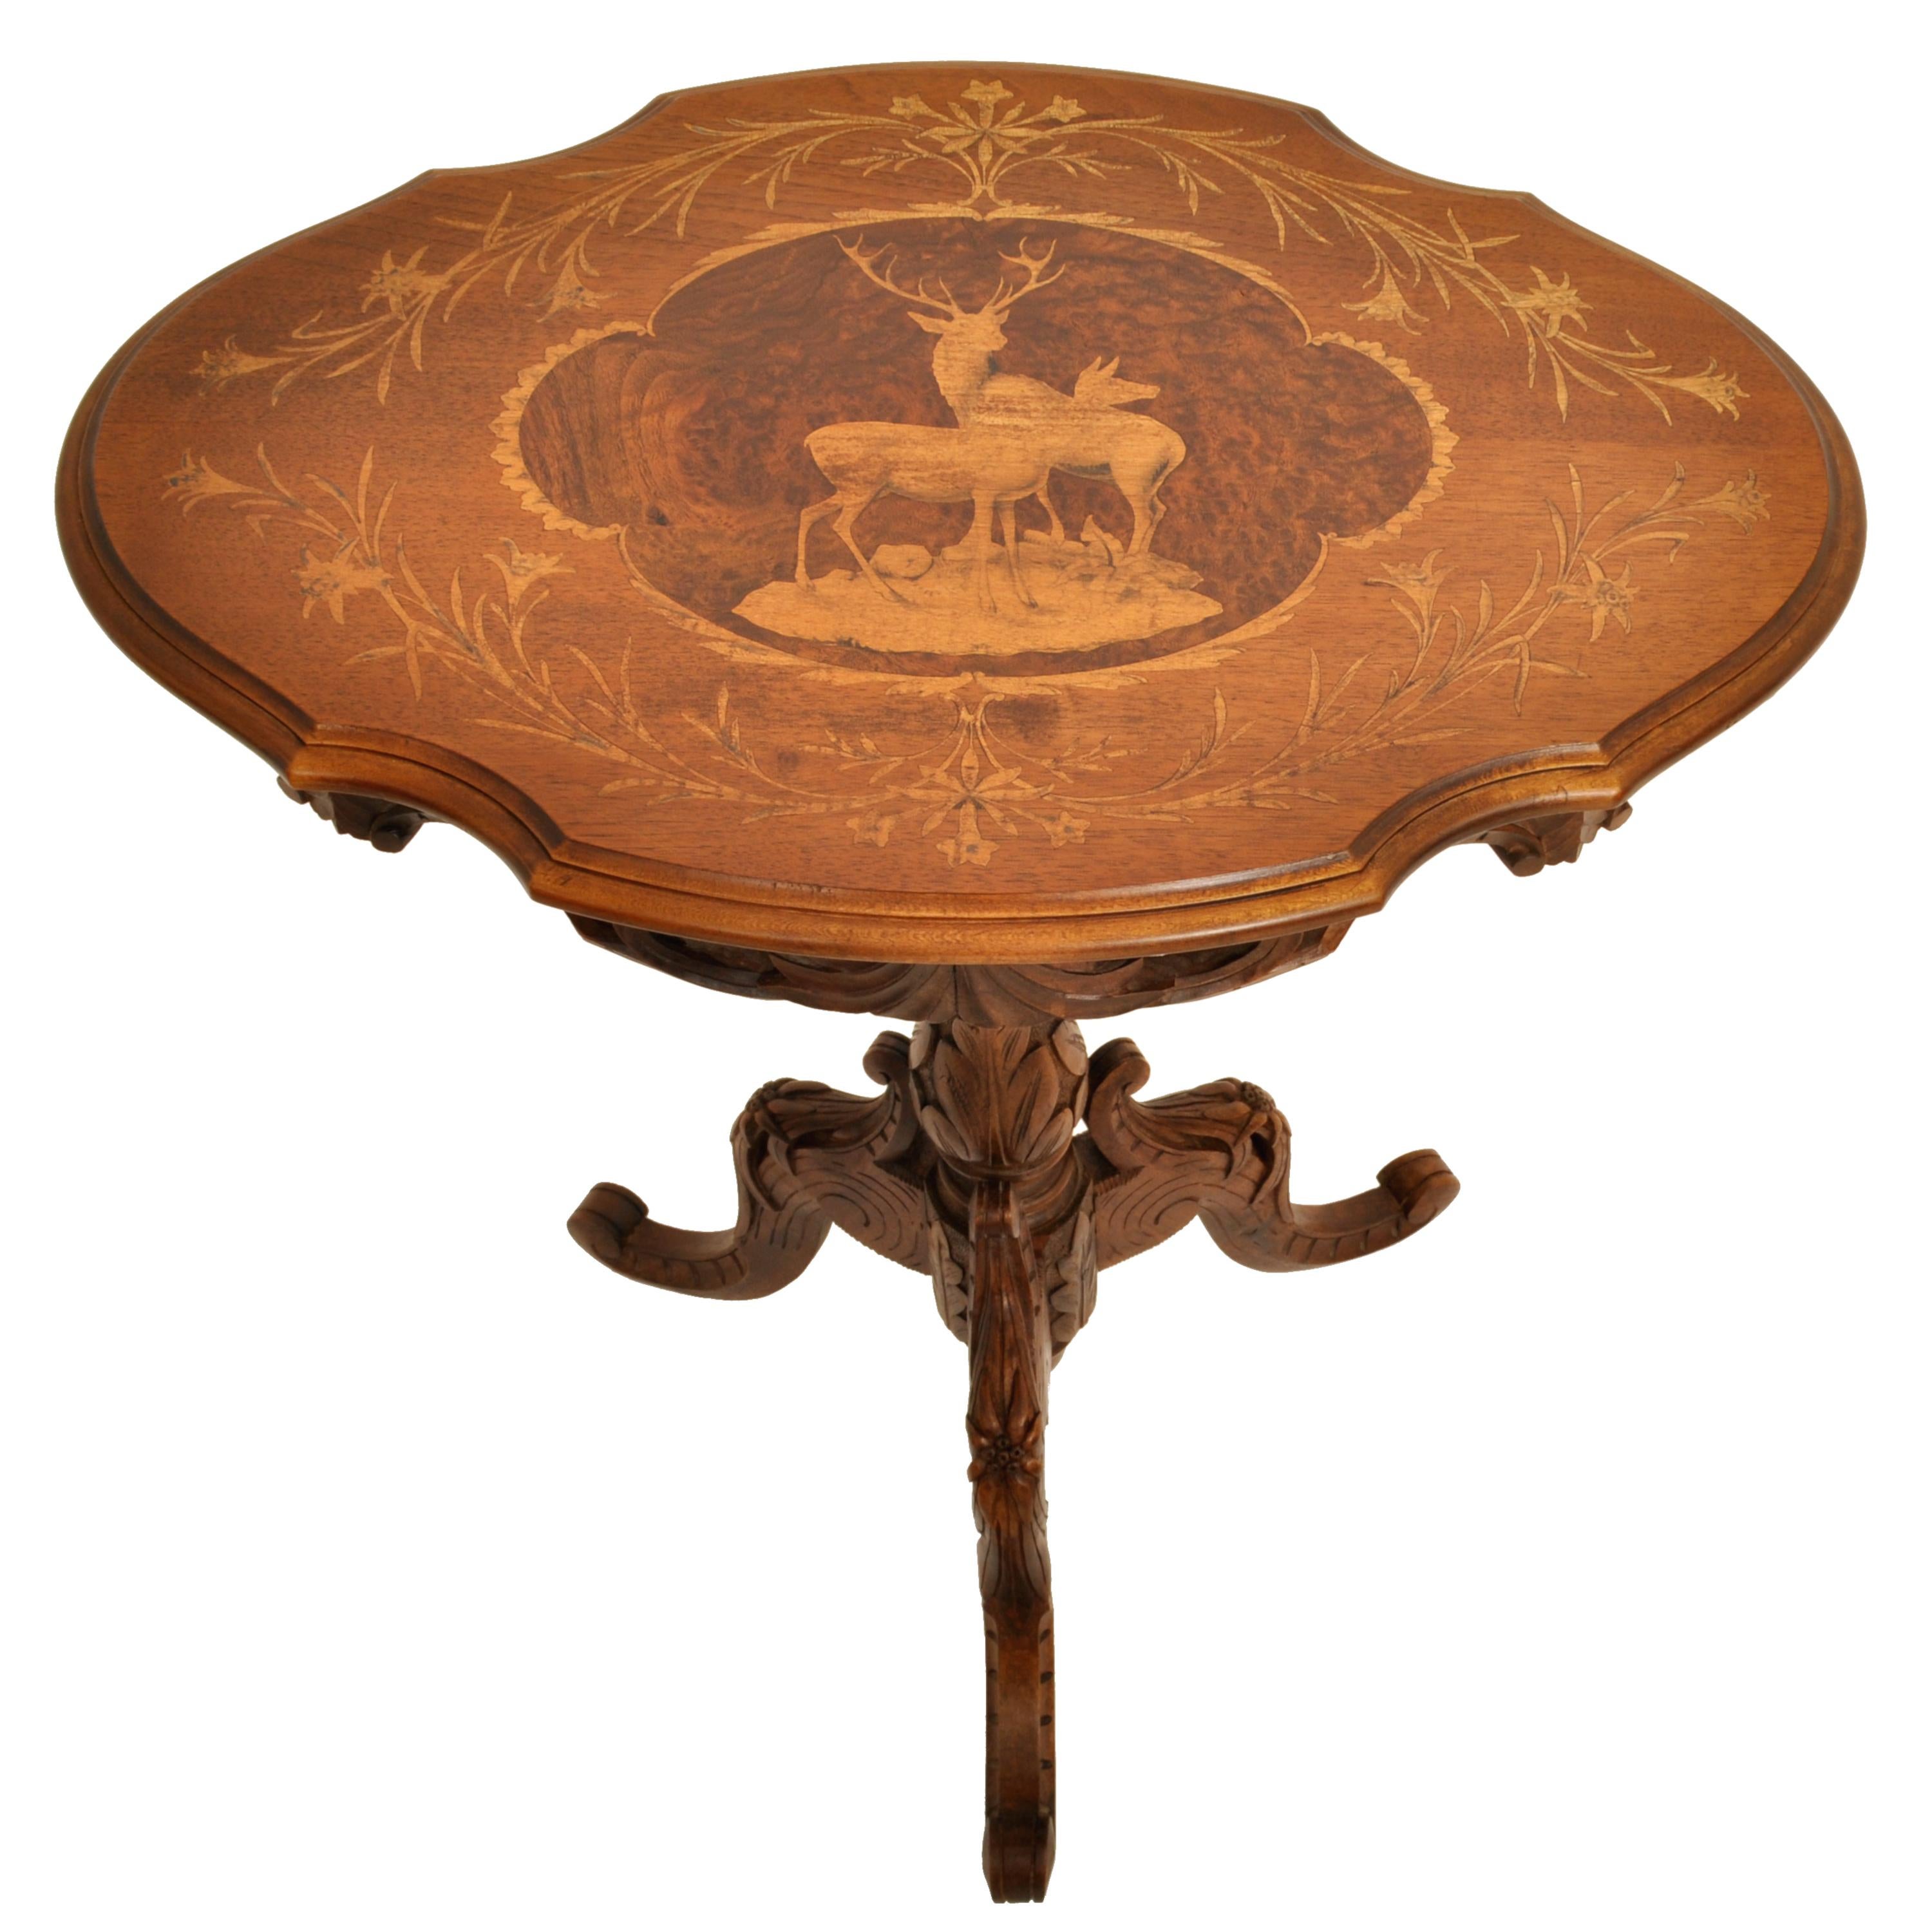 A good antique Swiss Black Forest marquetry walnut tilt-top table, circa 1870.
The table having a shield shaped tilt-top, that locks in place when in the down position. The table is finely inlaid in fruitwoods, having a floral design enclosing a